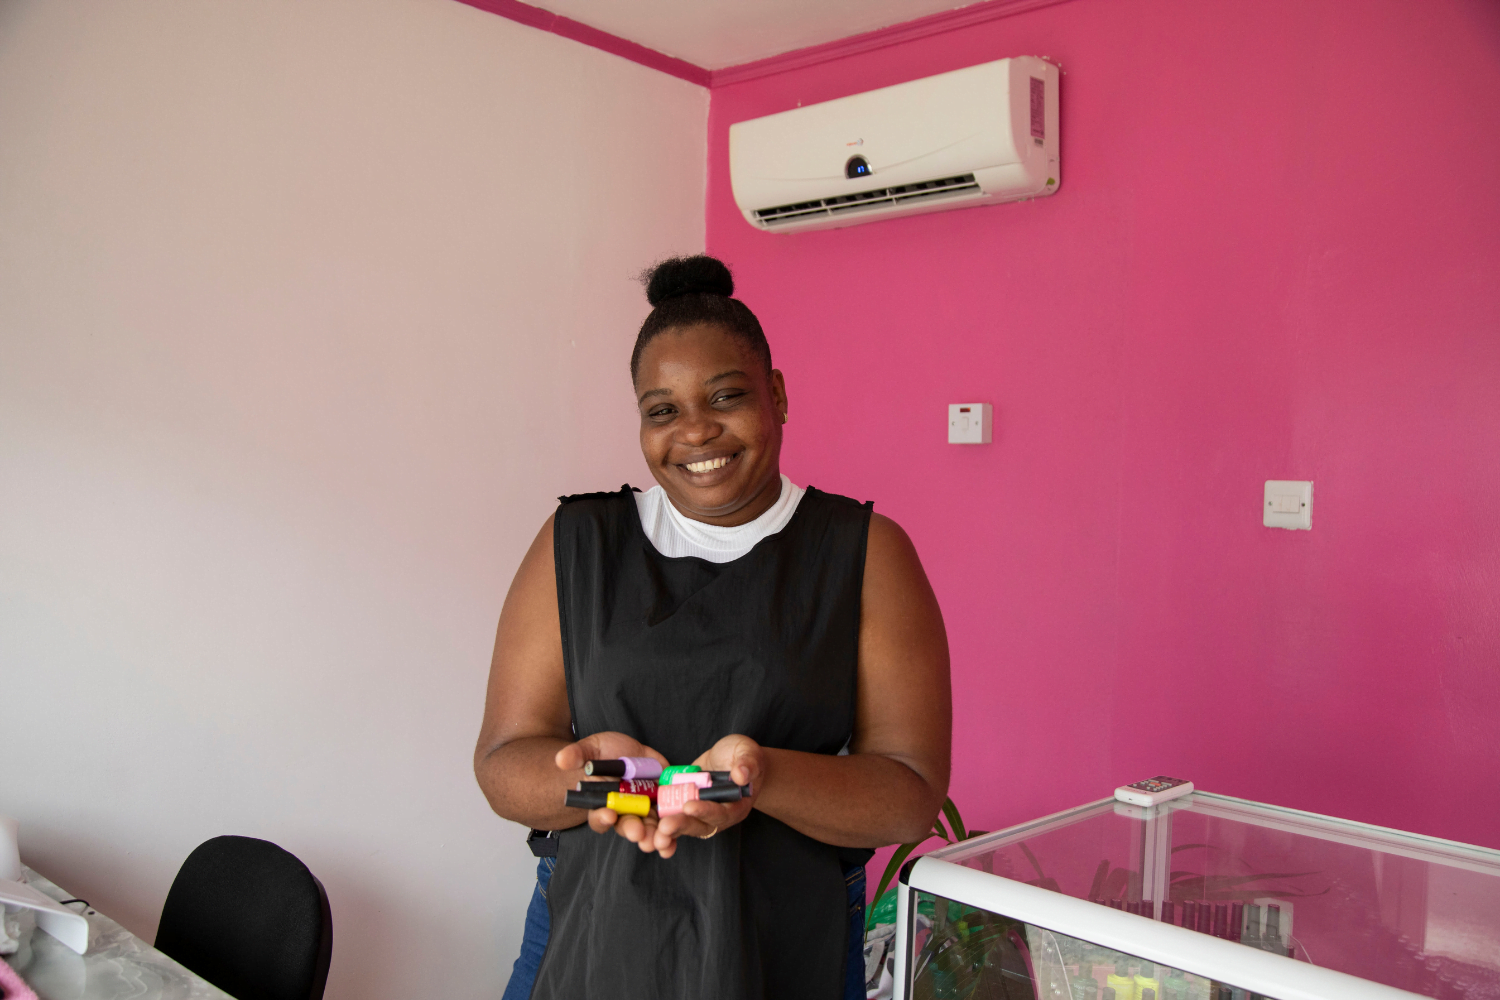 Akela Henry, a woman entrepreneur from Guyana, stands in a black smock with a white sleeveless shirt underneath in a beauty shop. She is holding many colourful nail polish bottles. Her hair is in a bun and she is smiling.